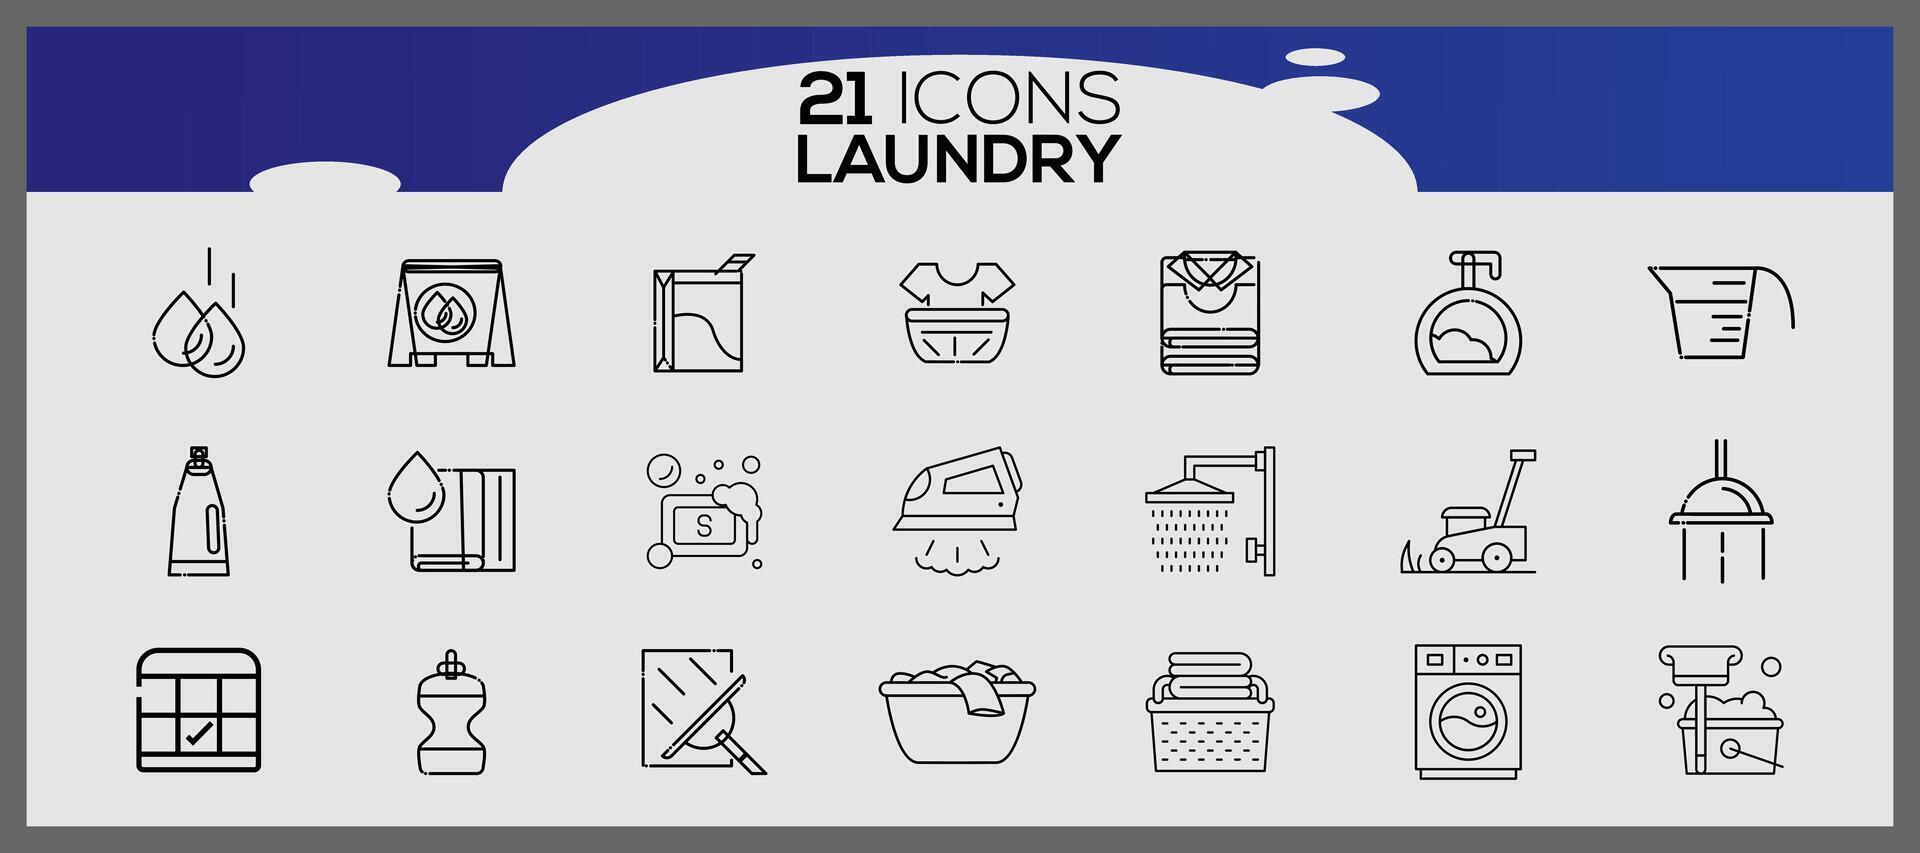 Washing icons and laundry symbols in flat style. Clean laundry and dryer service line icons. vector